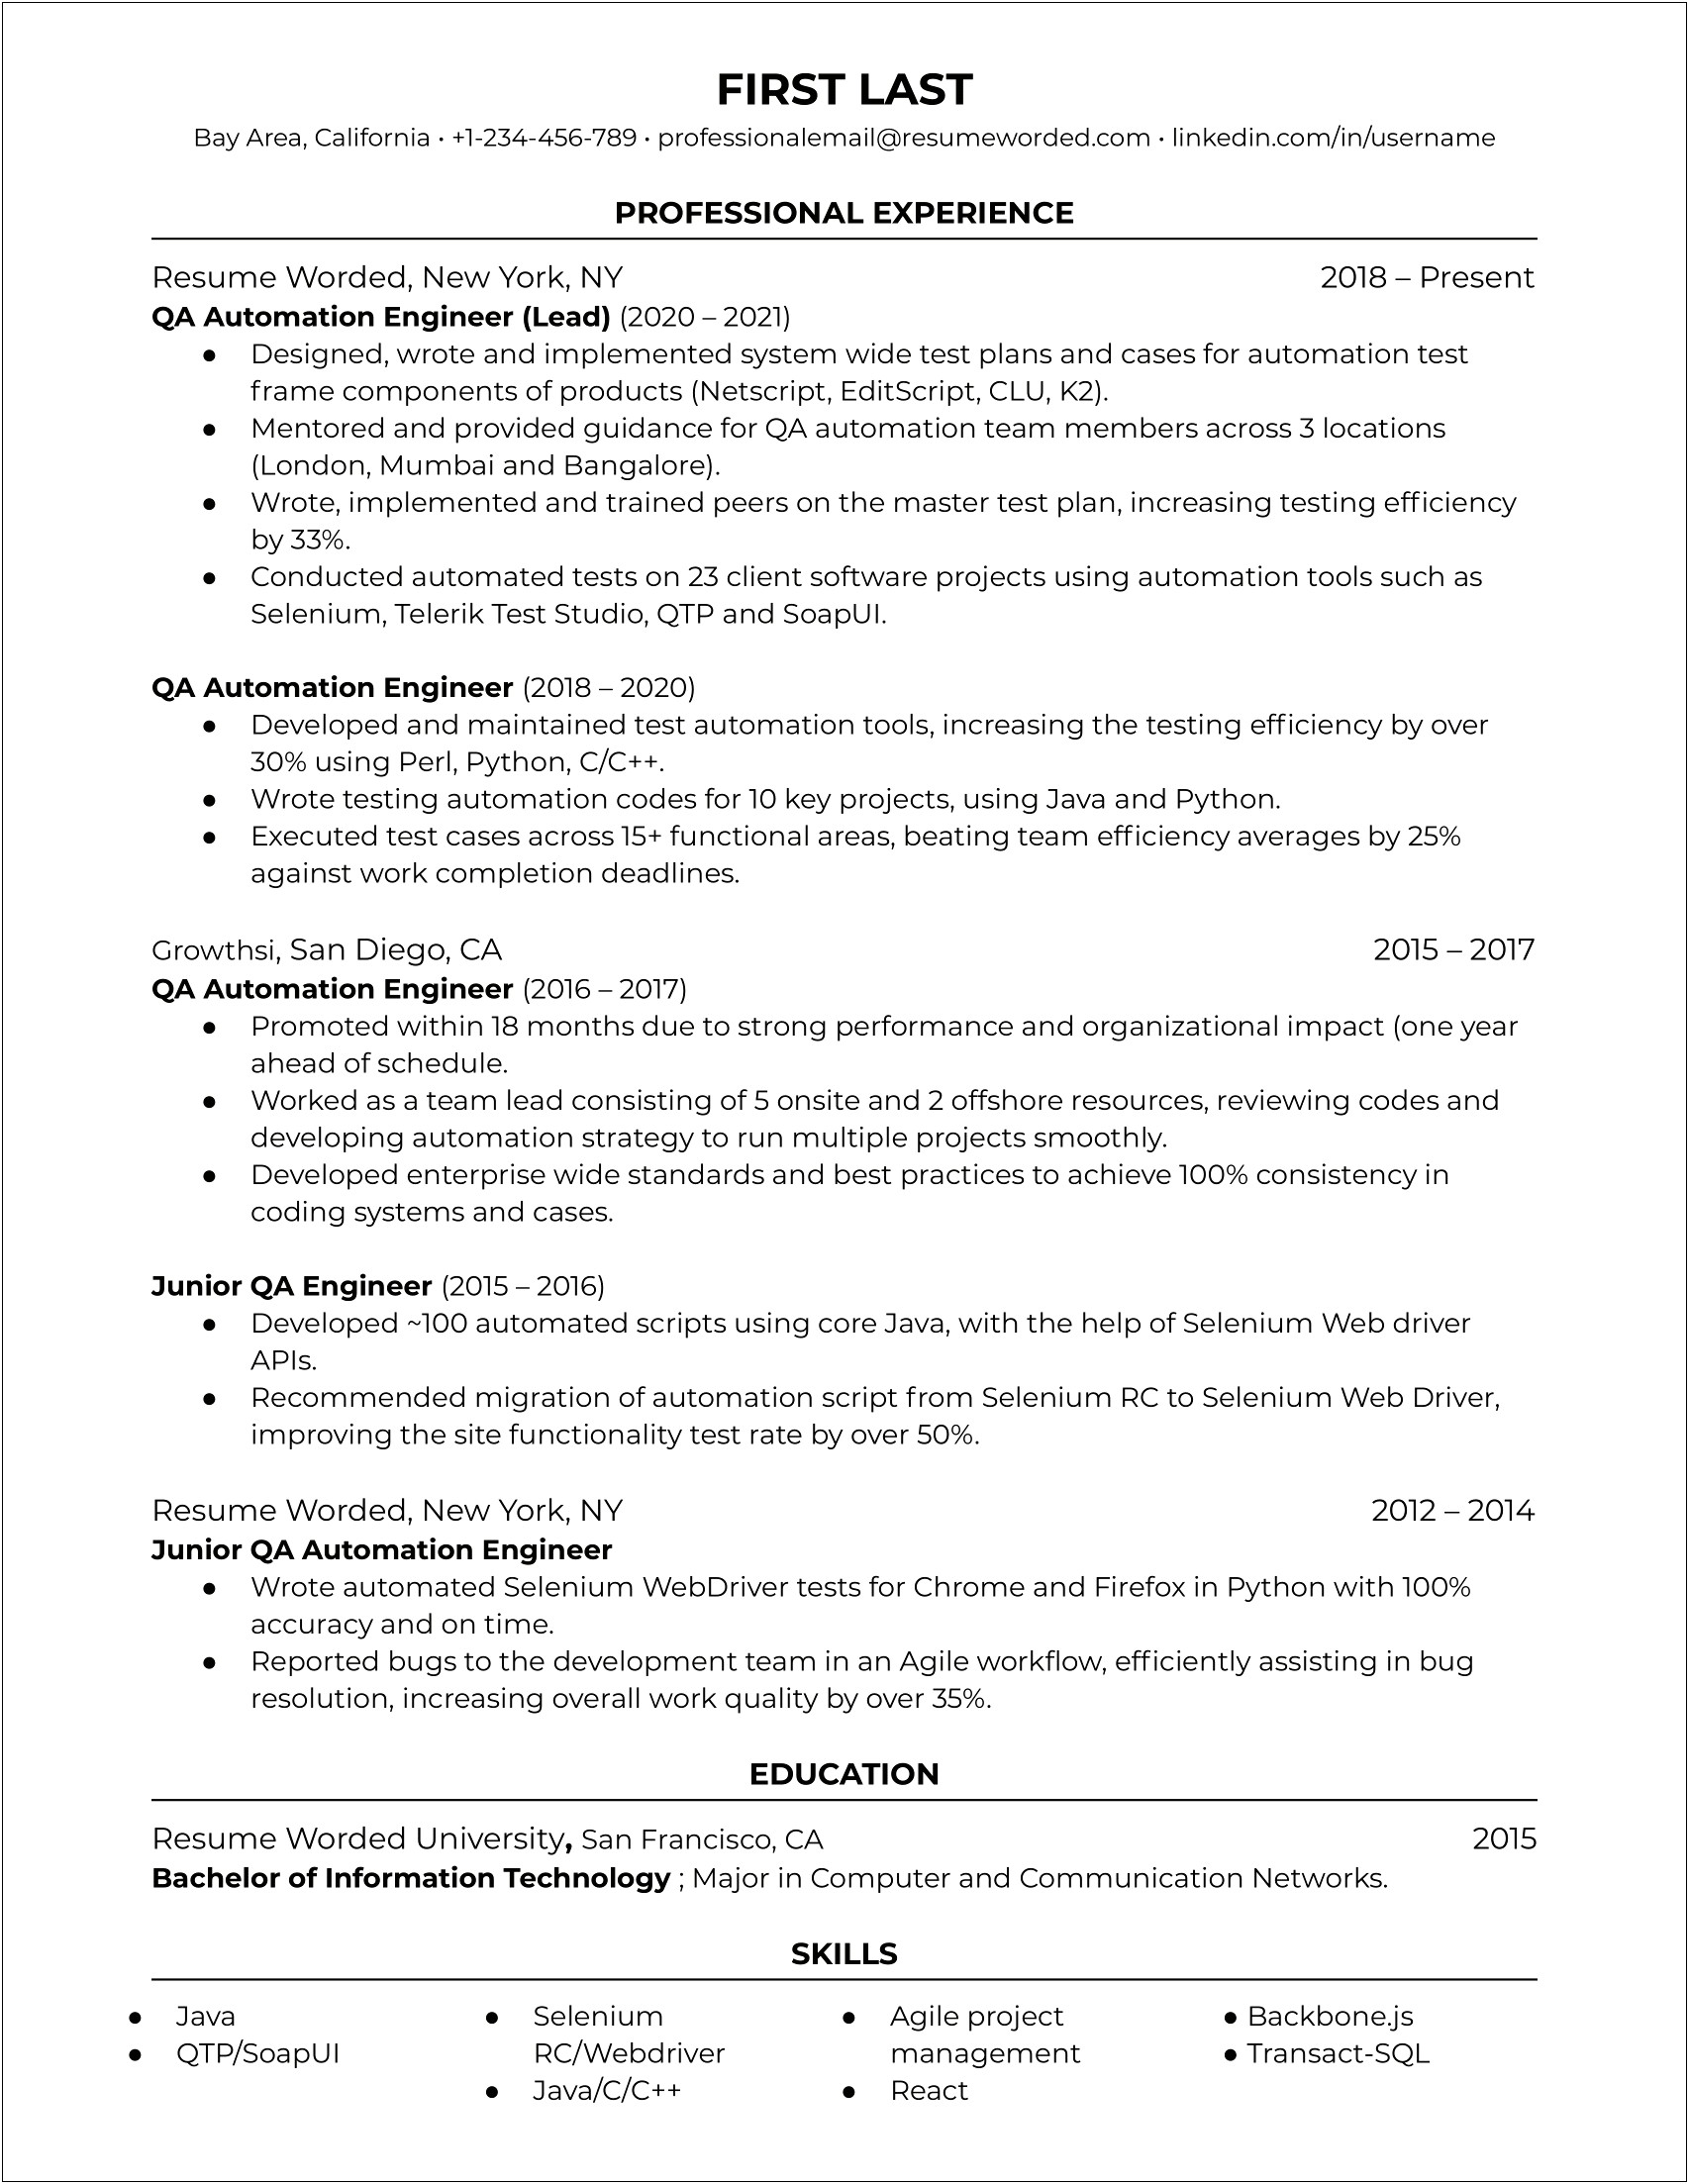 Engineering Management Quality Resume Examples